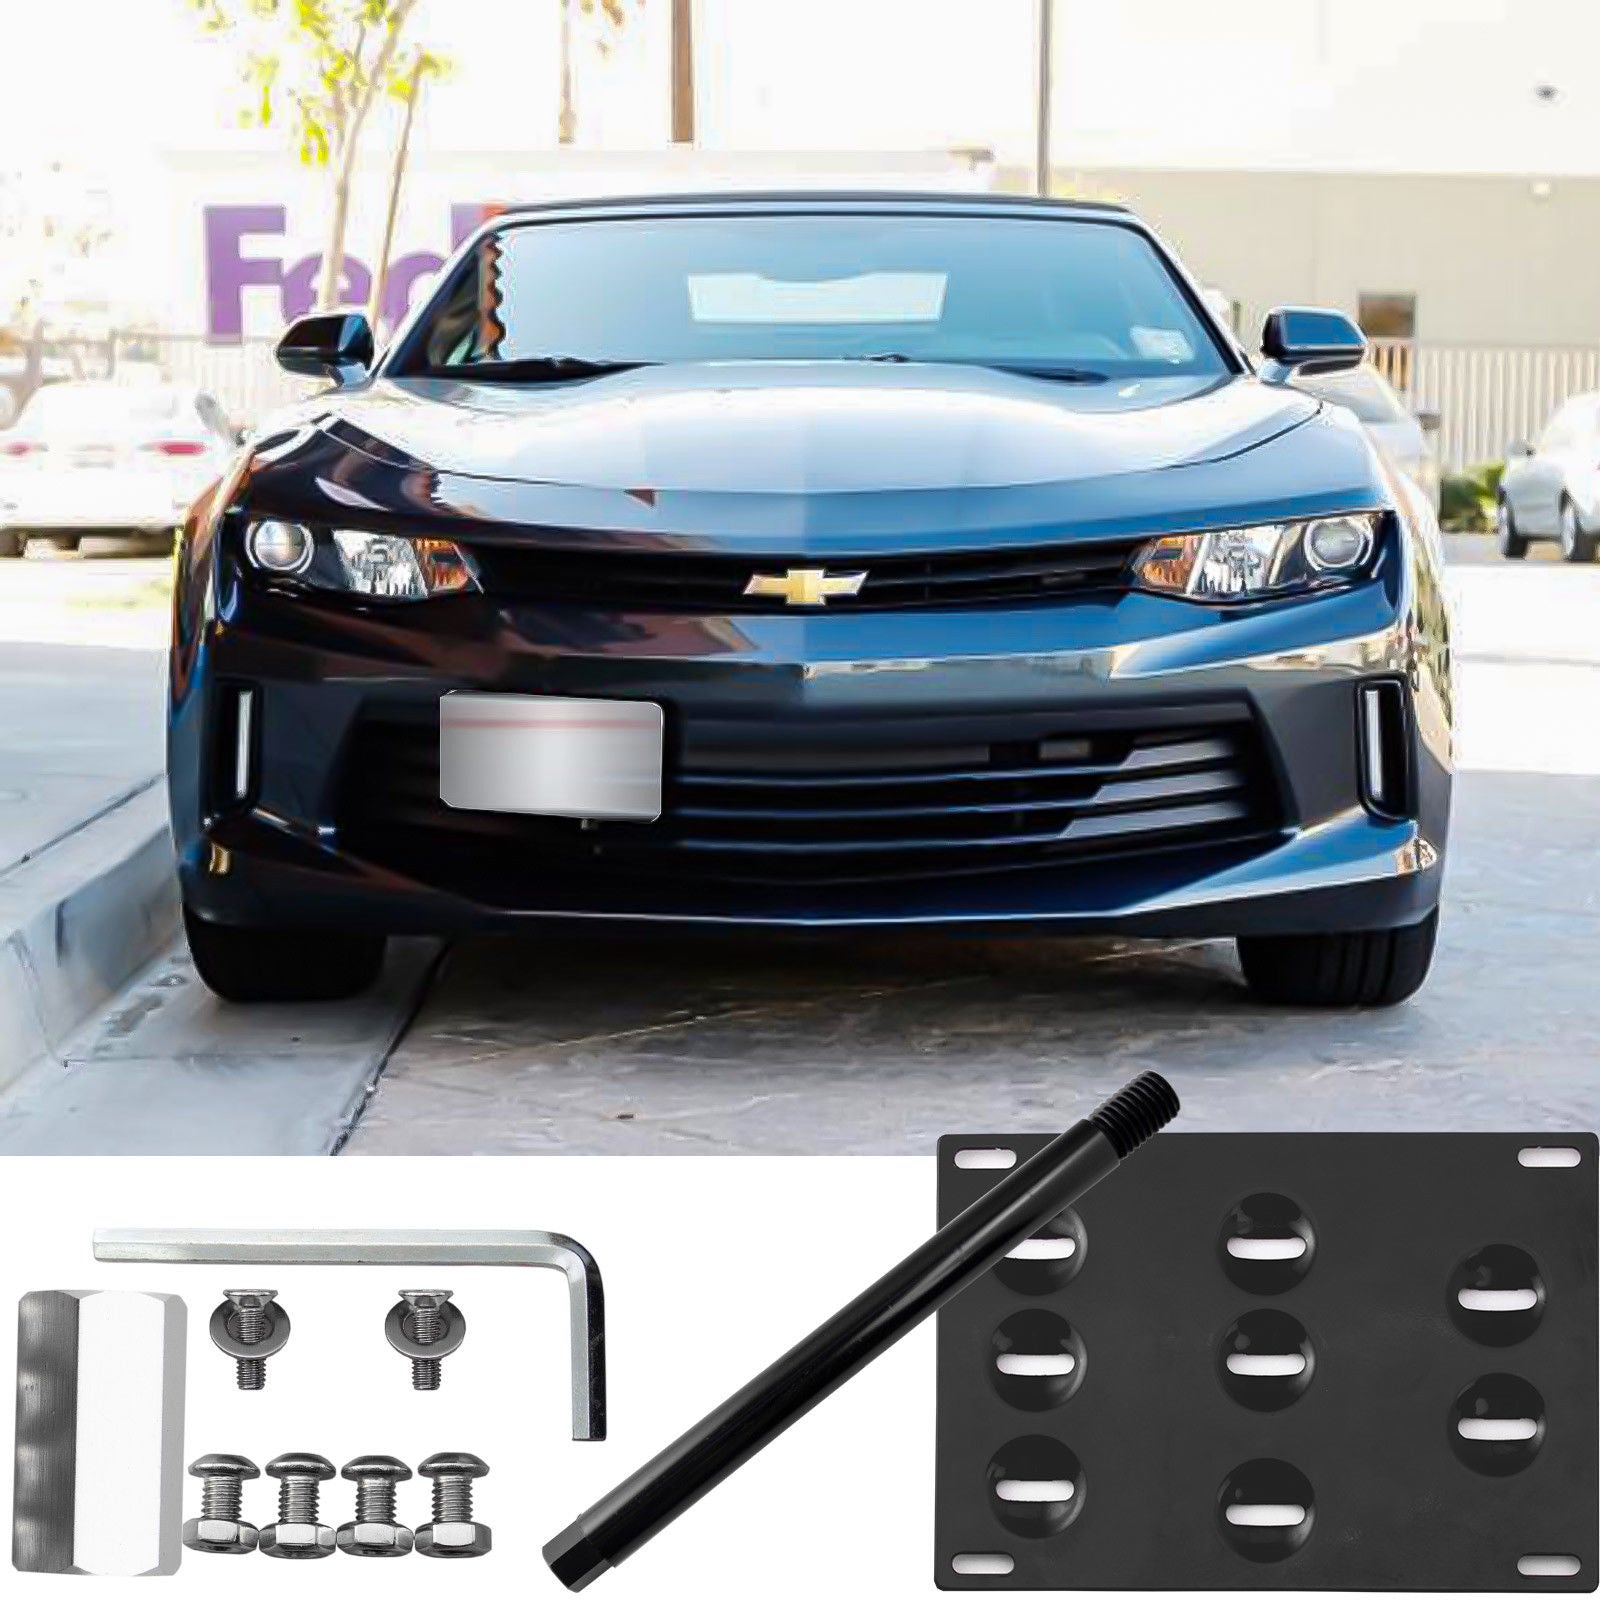 Front Bumper License Plate Tow Hook Bracket Kit for Chevy Camaro